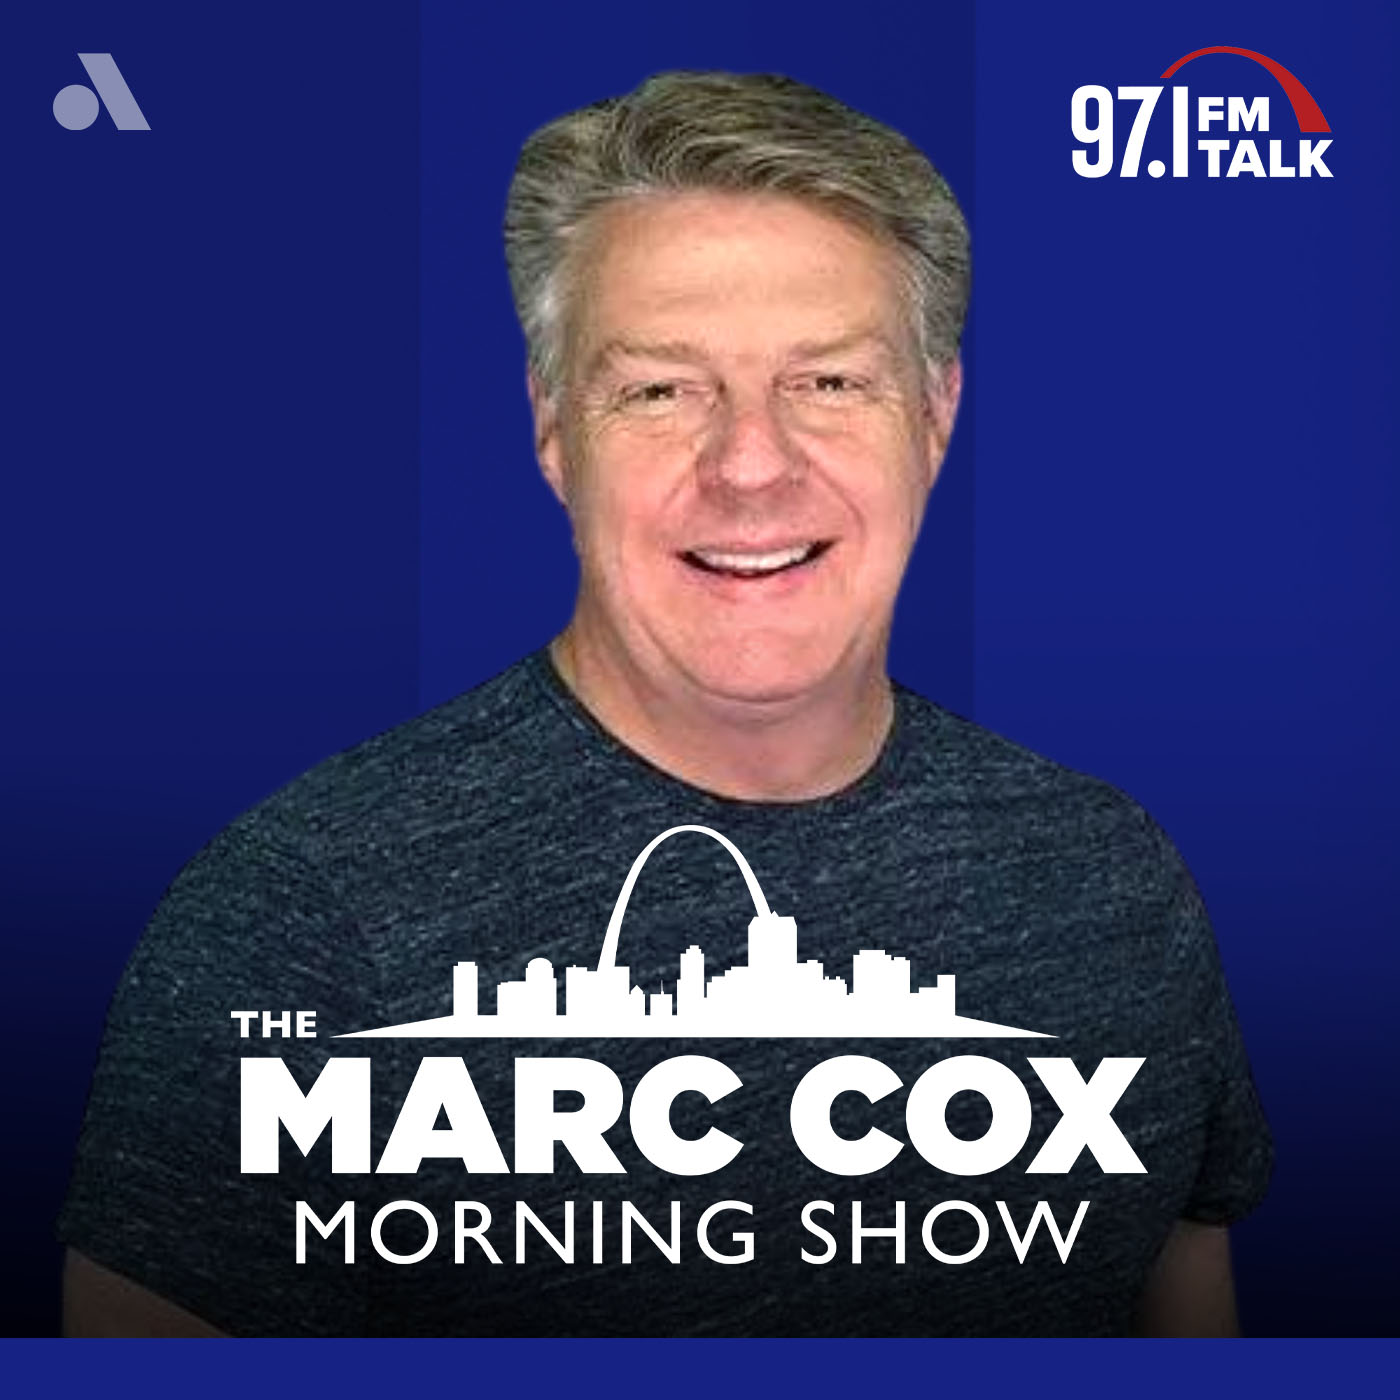 Hour 1 - The Marc Cox Morning Show: Analyzing the Attempt on Trump's Life